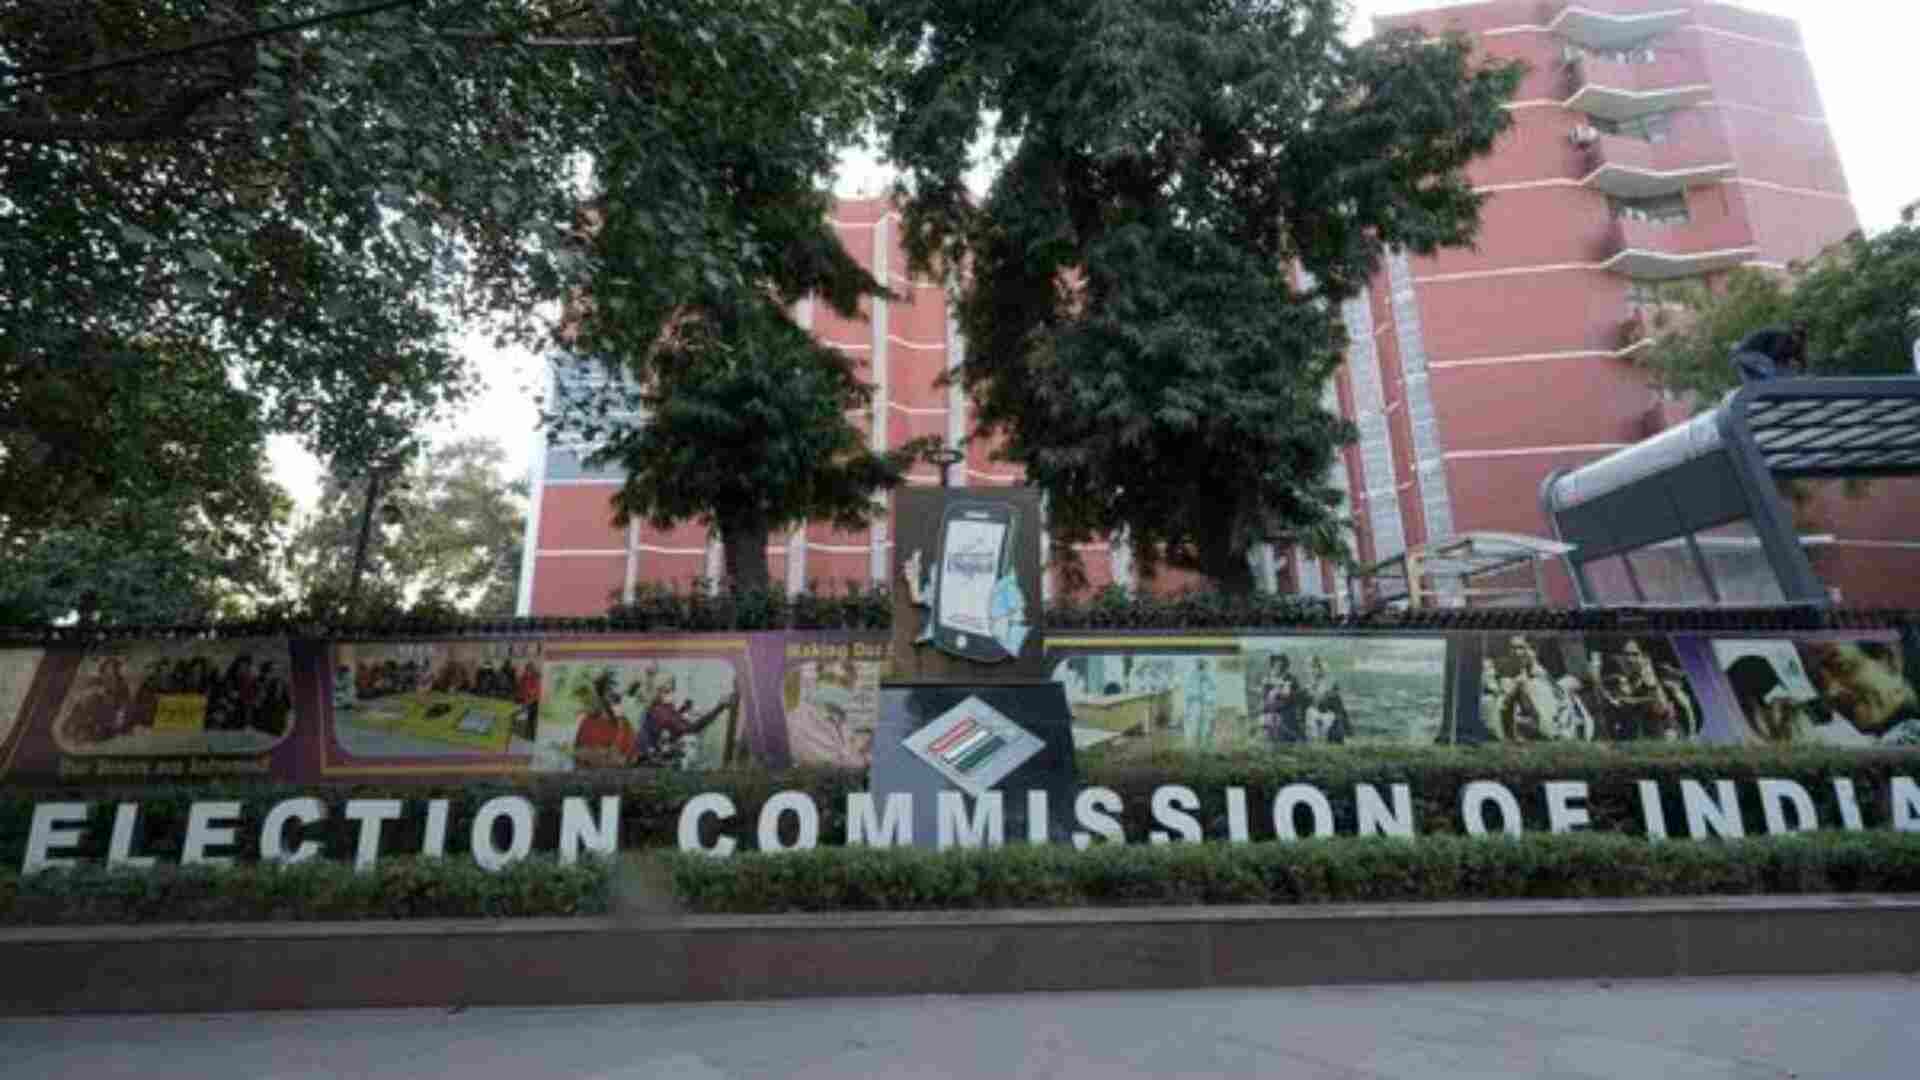 Election Commission Issues Advisory to Political Parties Regarding Voter Registration for Beneficiary Schemes